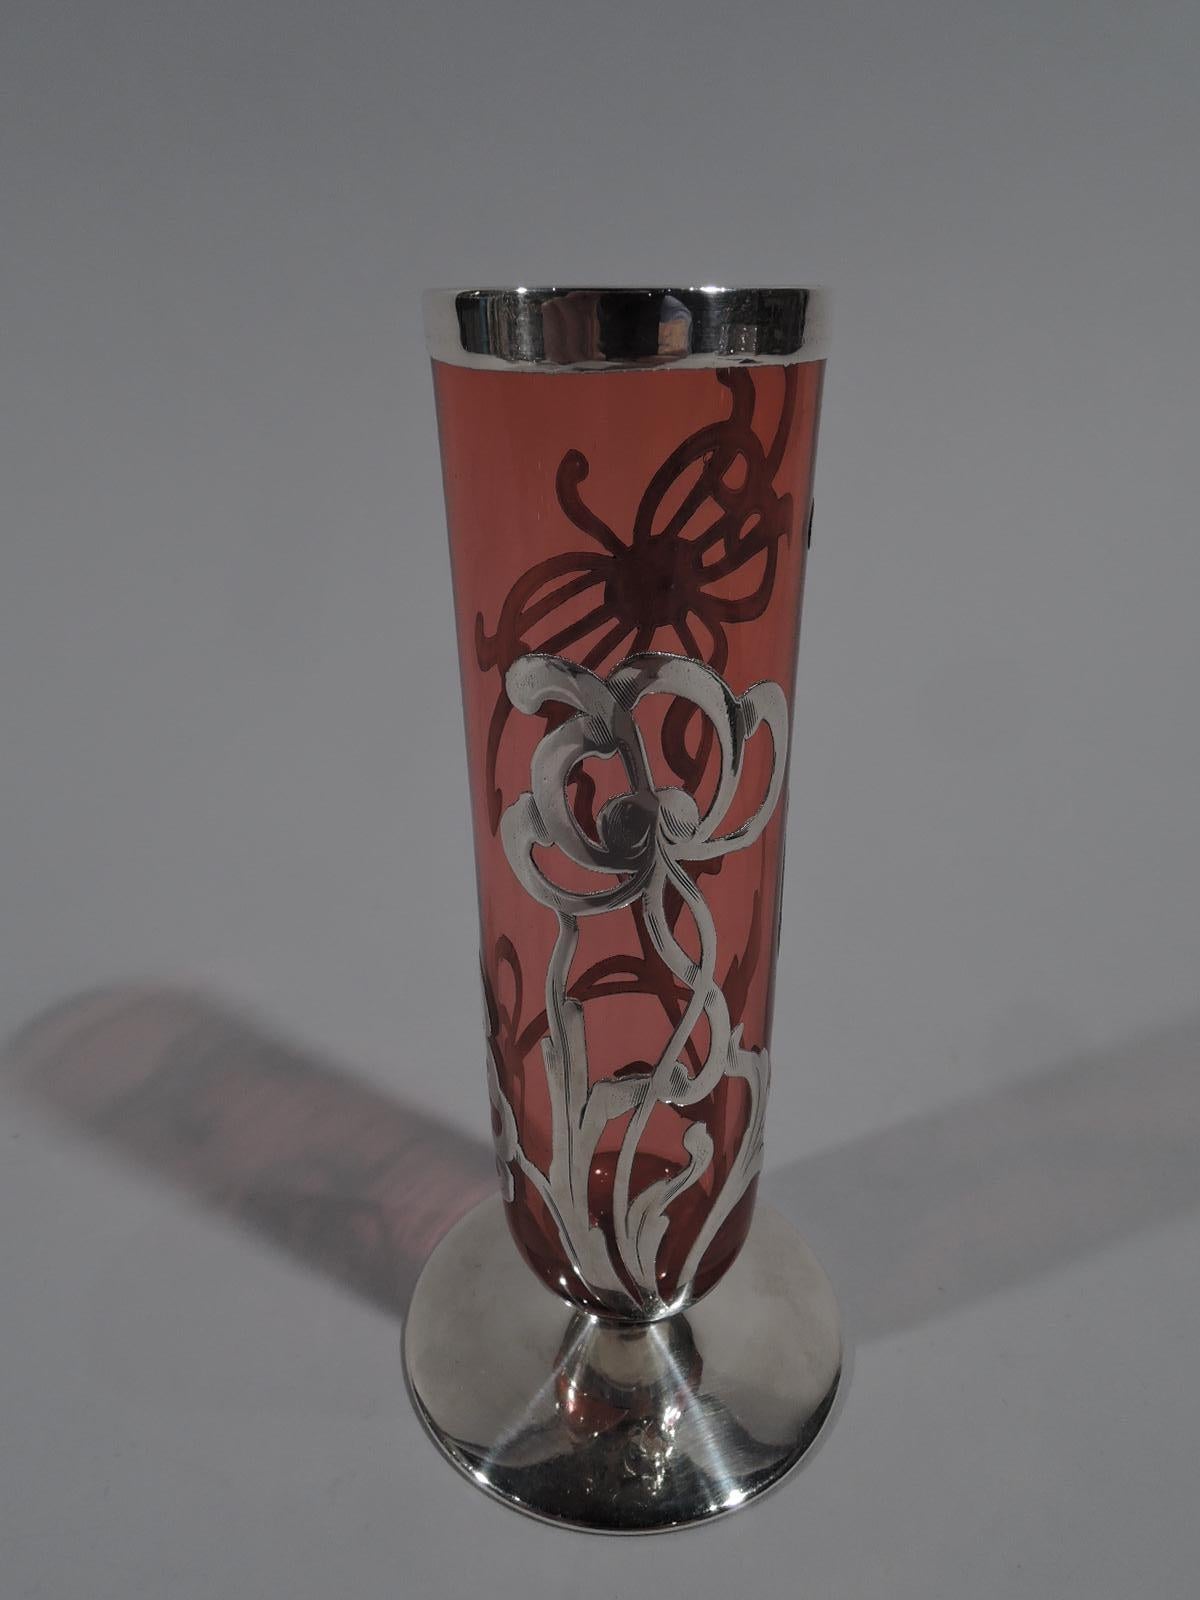 Turn-of-the-century American Art Nouveau glass bud vase with engraved silver overlay. Cylindrical with curved bottom and flat and round silver-covered foot. Open overlay in form of loose and spidery flowers. Glass is pinkish red.